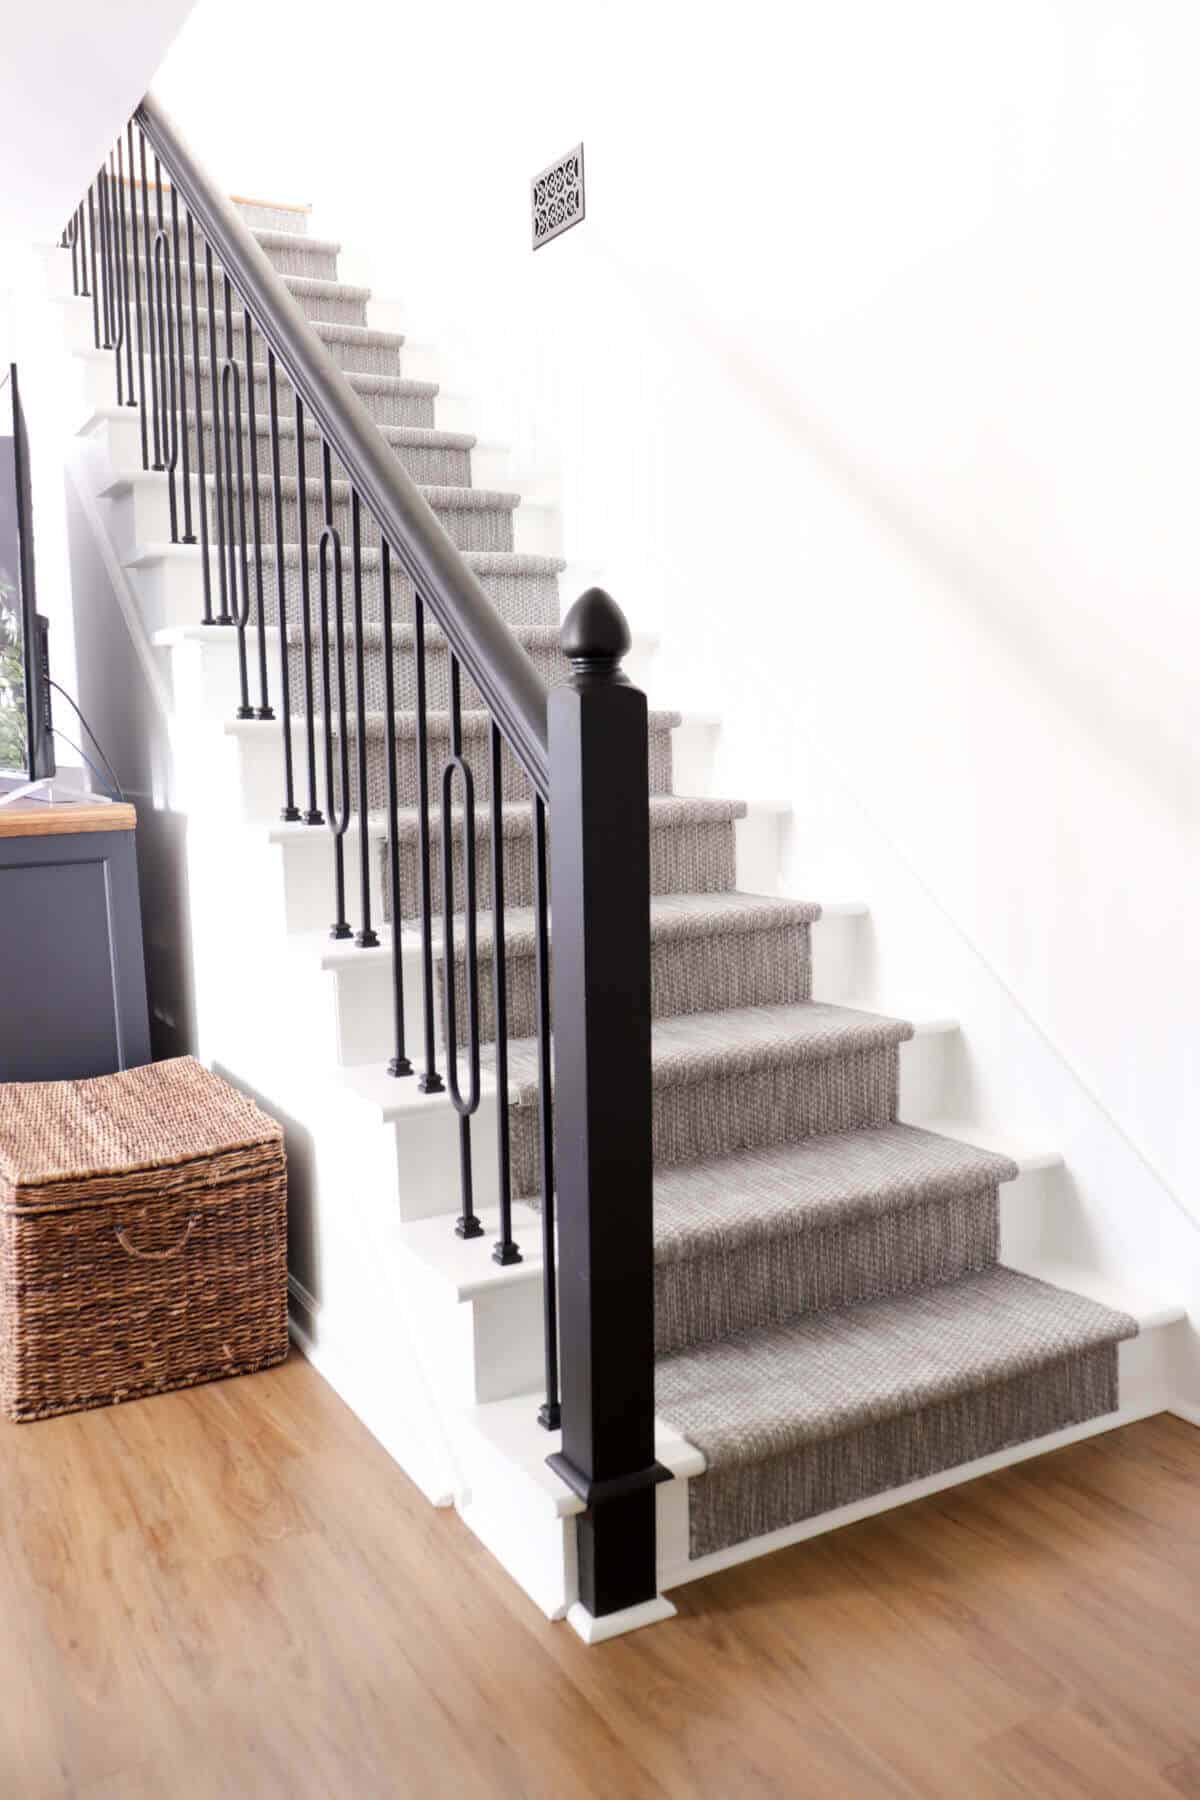 white painted basement stairs with black banister and iron balusers completed with a gray indoor outdoor stair runner